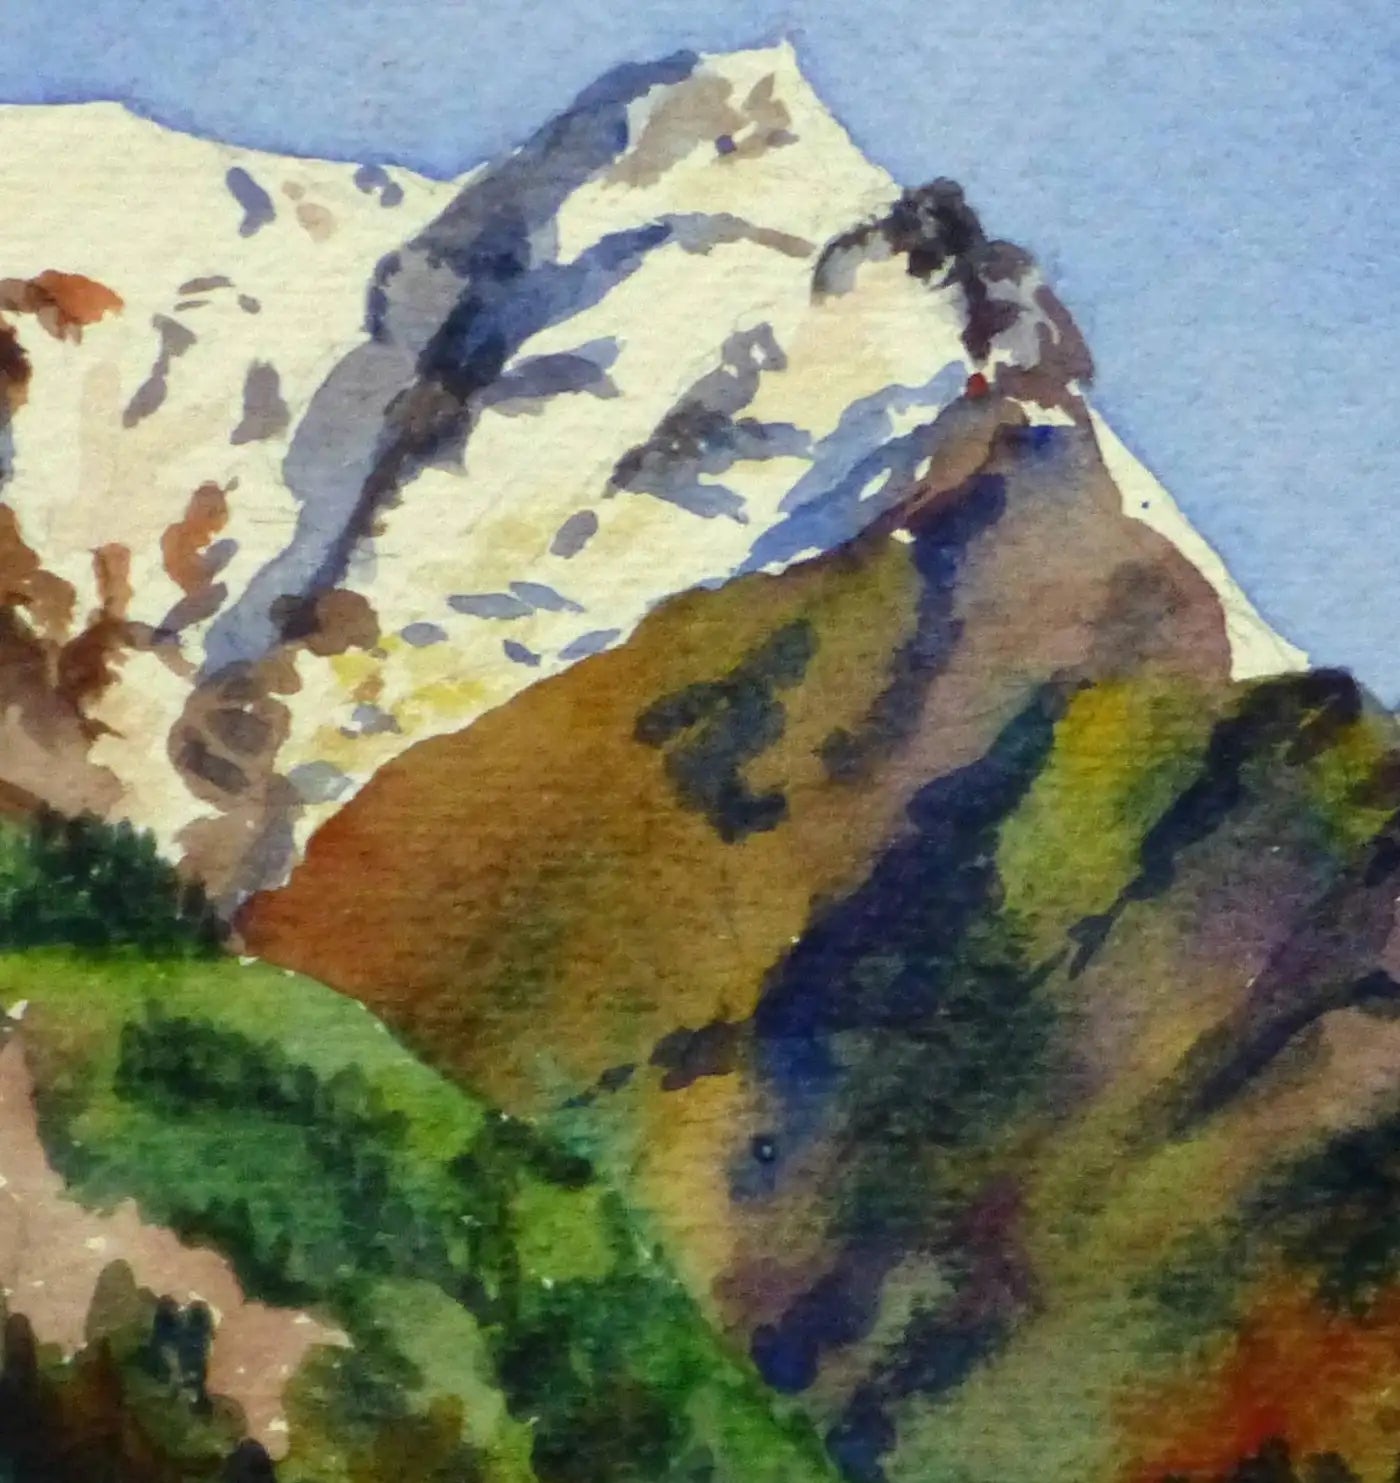 Where the Mountains Meet, Vintage Framed Watercolor